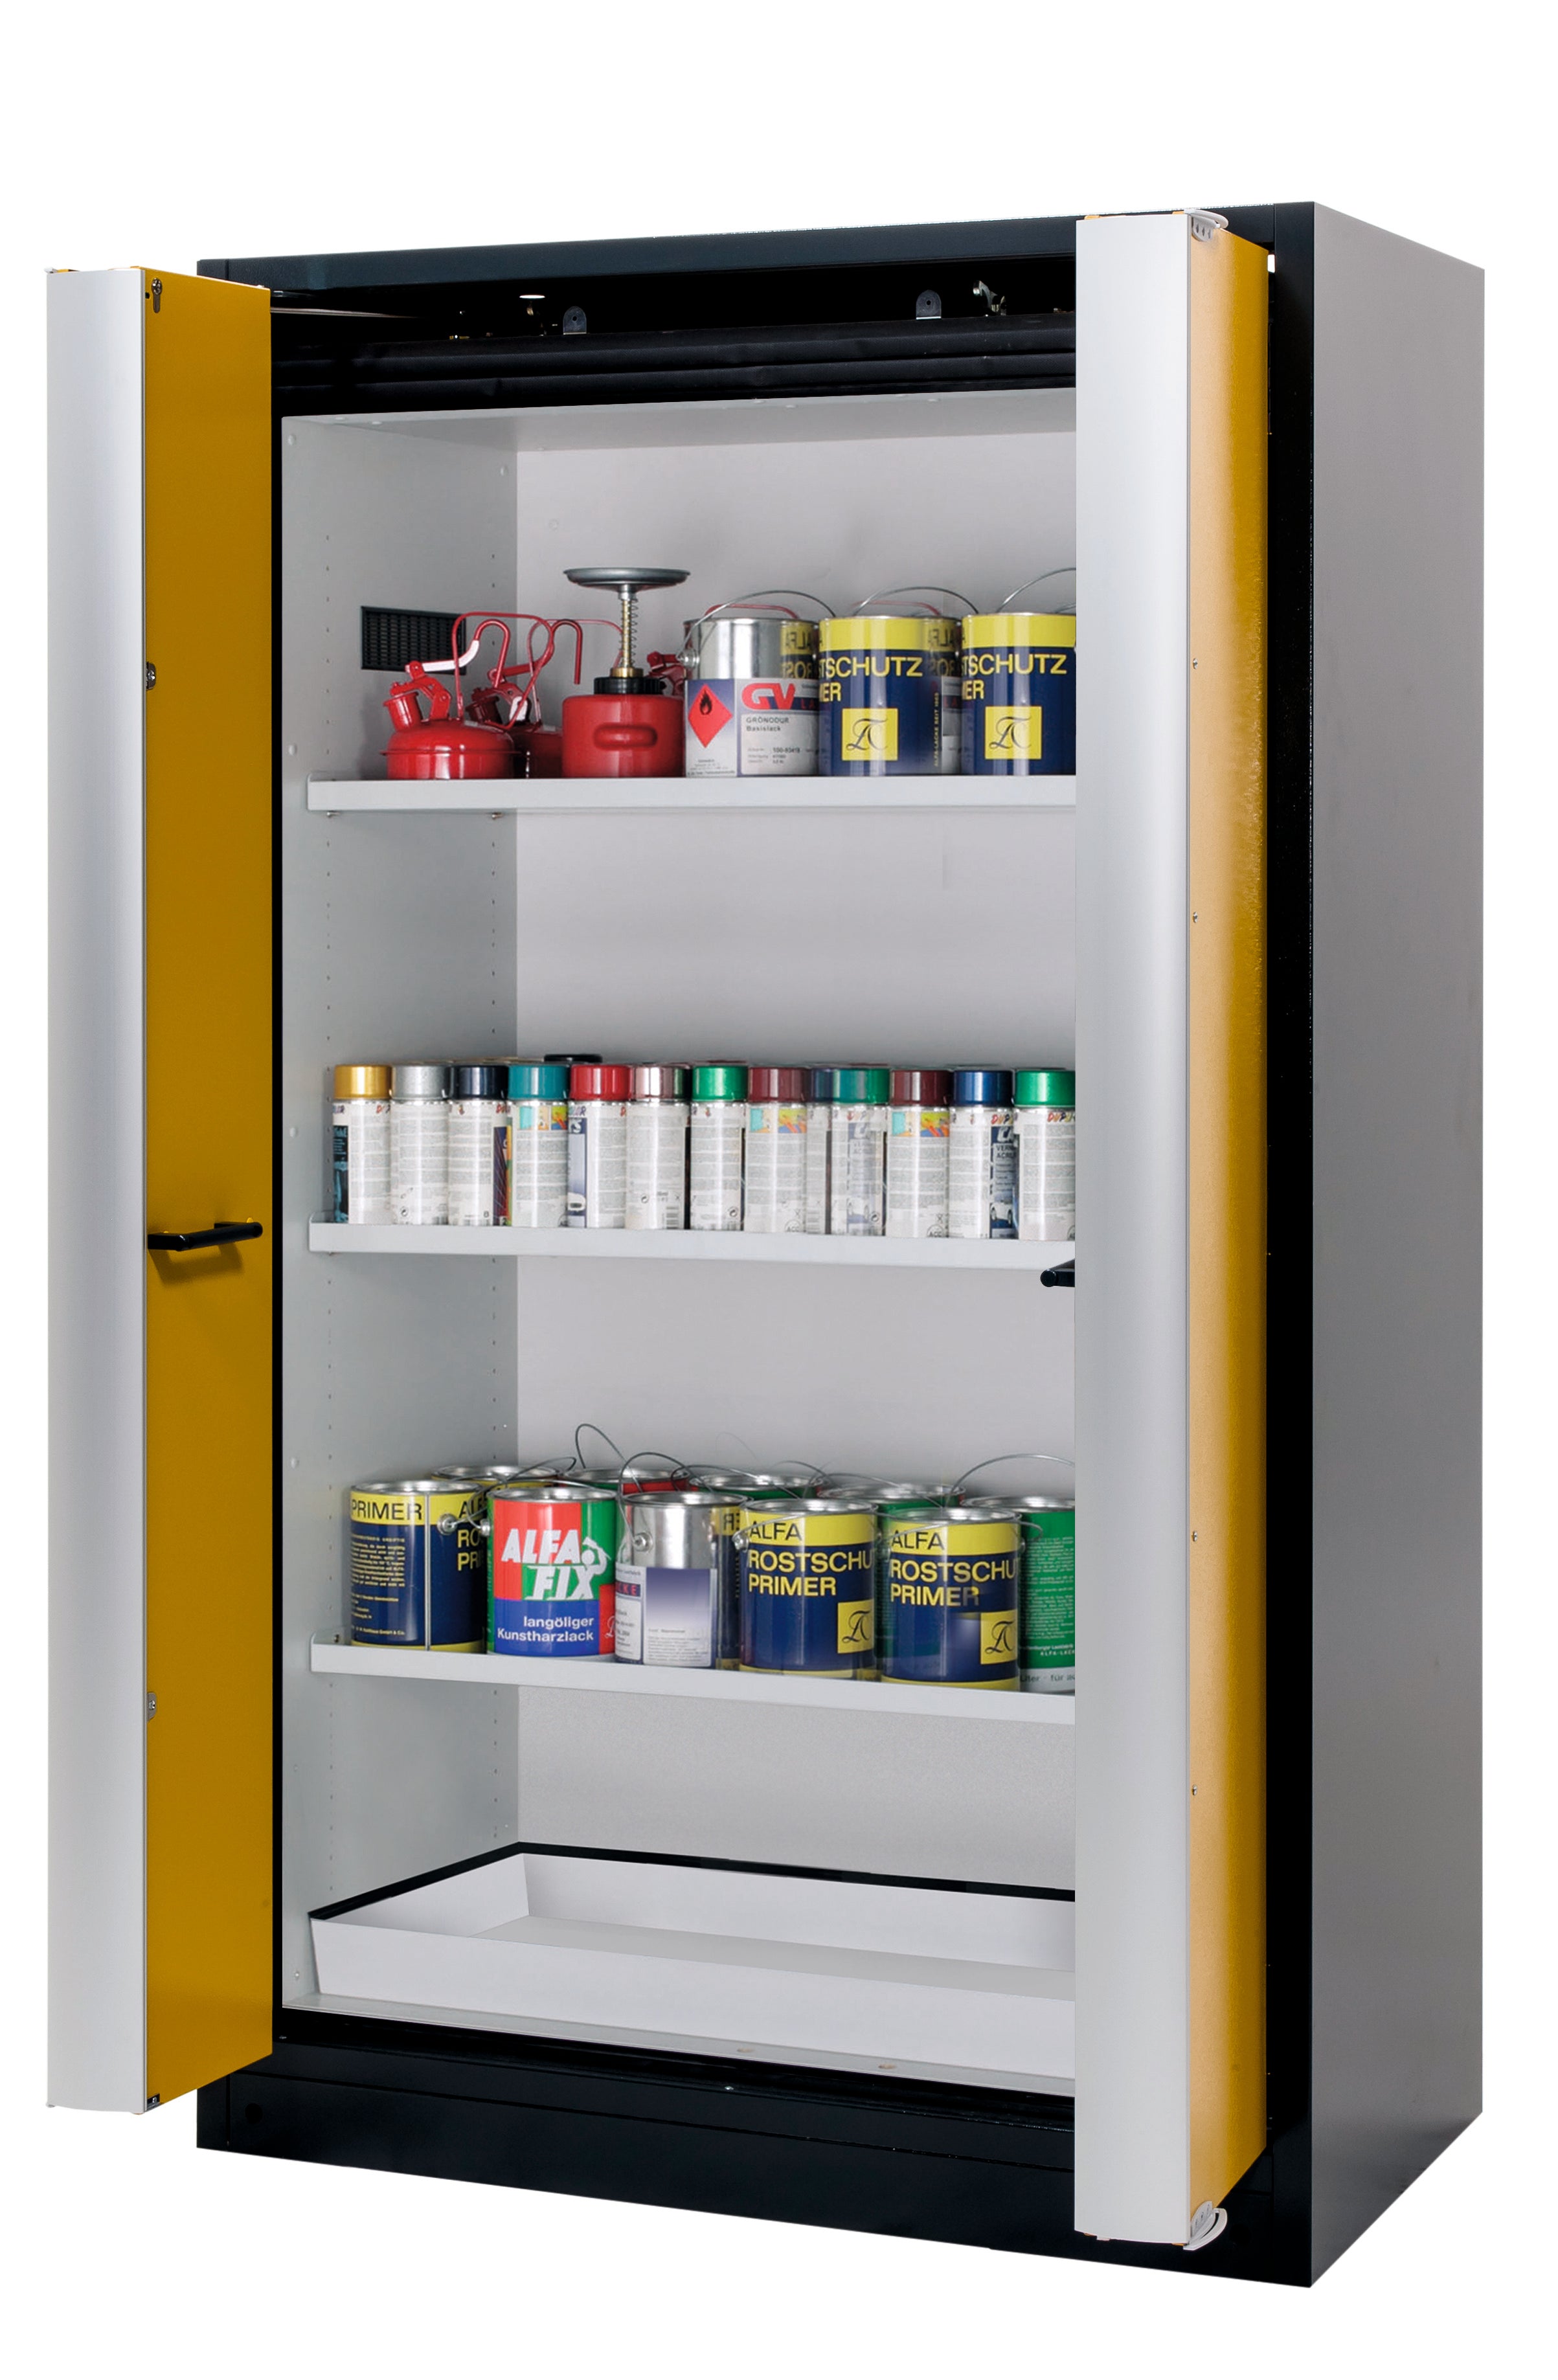 Type 90 safety cabinet Q-PHOENIX-90 model Q90.195.120.FD in safety yellow RAL 1004 with 3x standard shelves (sheet steel)